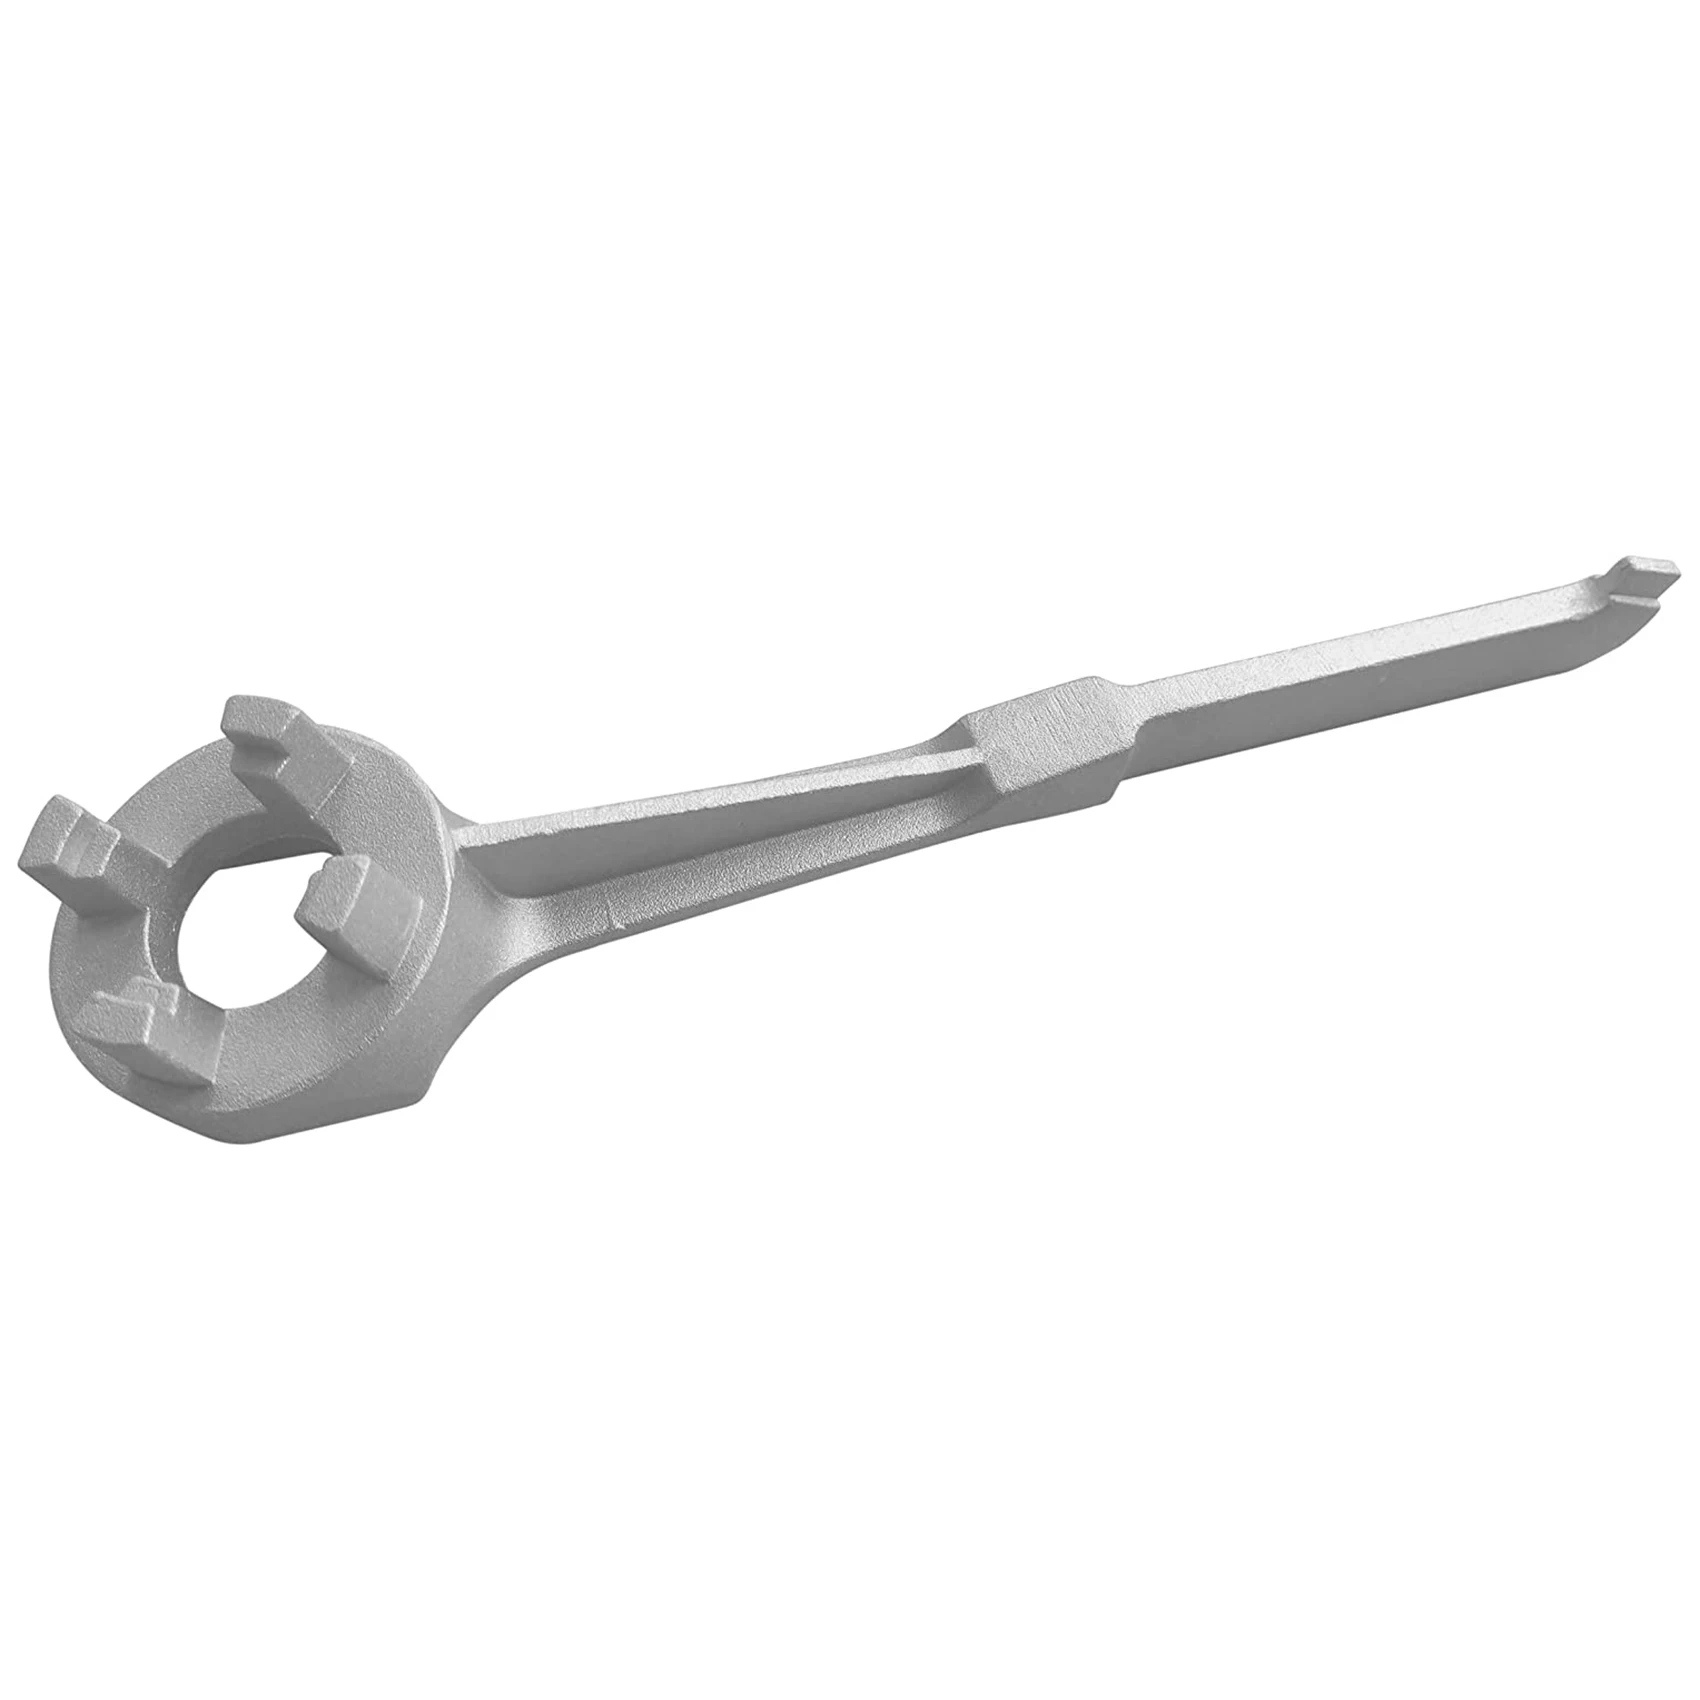 

Aluminum Drum Plug Wrench for Opening 10 15 20 30 50 55 Gallon Drums Suitable for 2 Inch and 3/4 Inch Lids